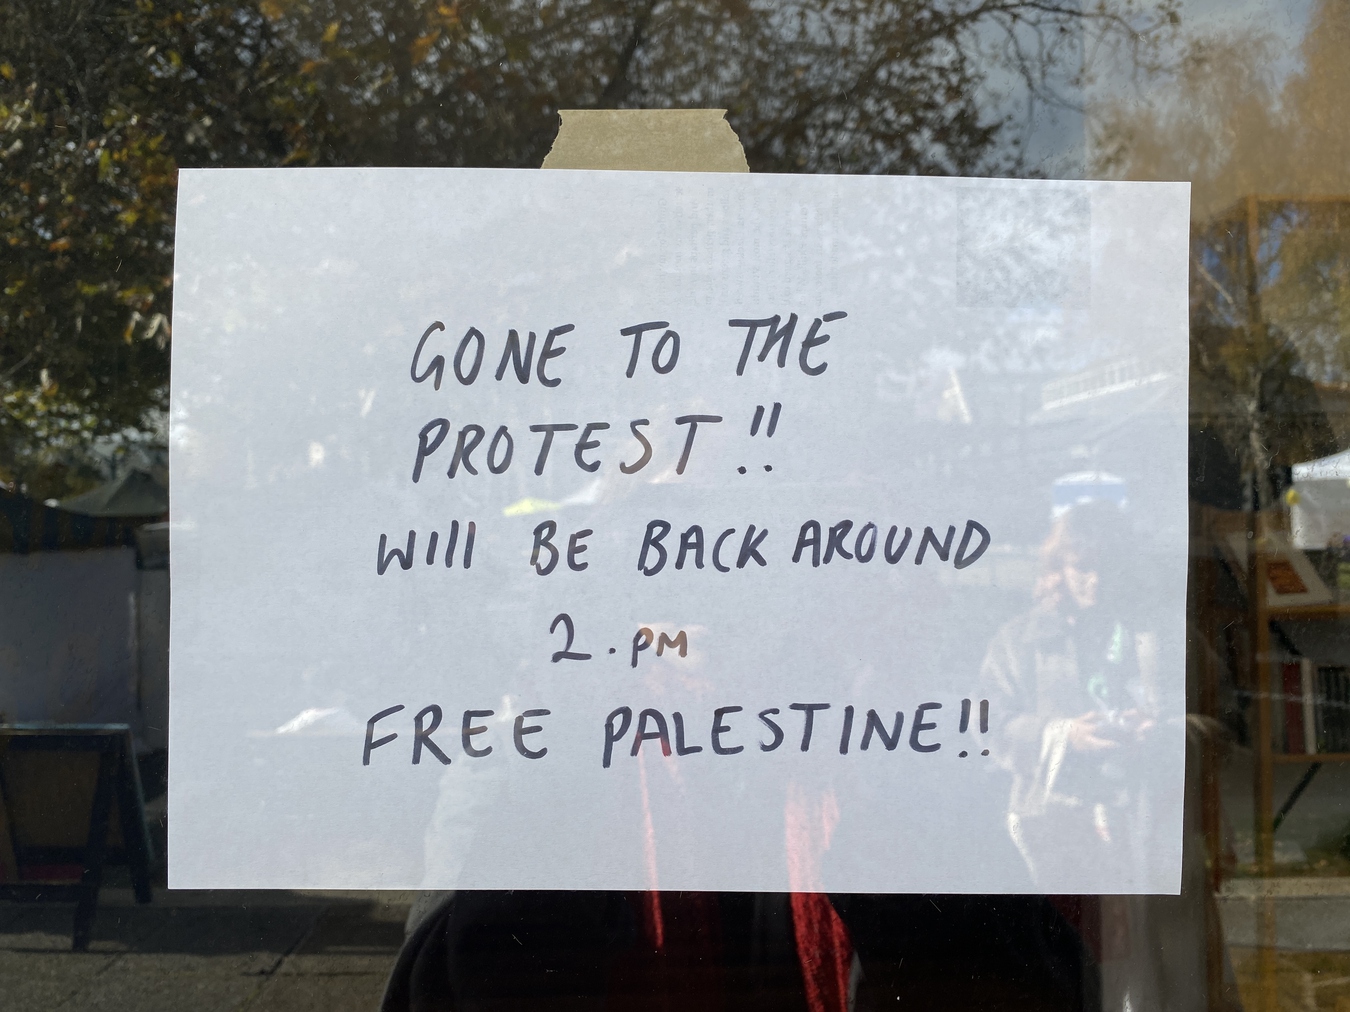 Sign on the door to The Physics Room reads "Gone to the protest!! Will be back around 2pm. Free Palestine!"